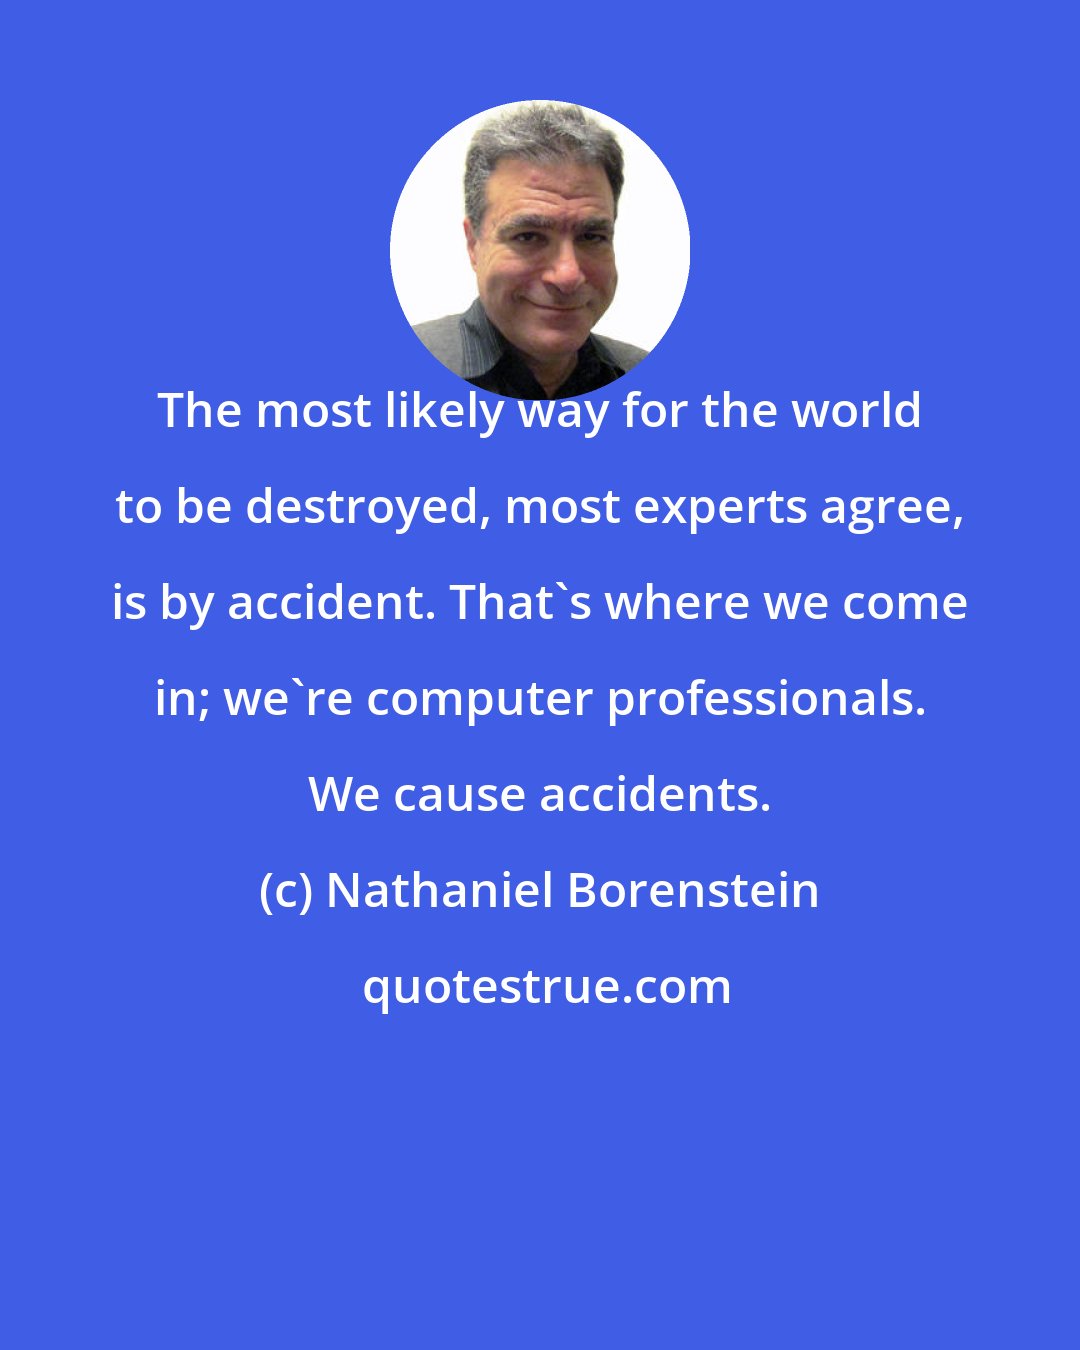 Nathaniel Borenstein: The most likely way for the world to be destroyed, most experts agree, is by accident. That's where we come in; we're computer professionals. We cause accidents.